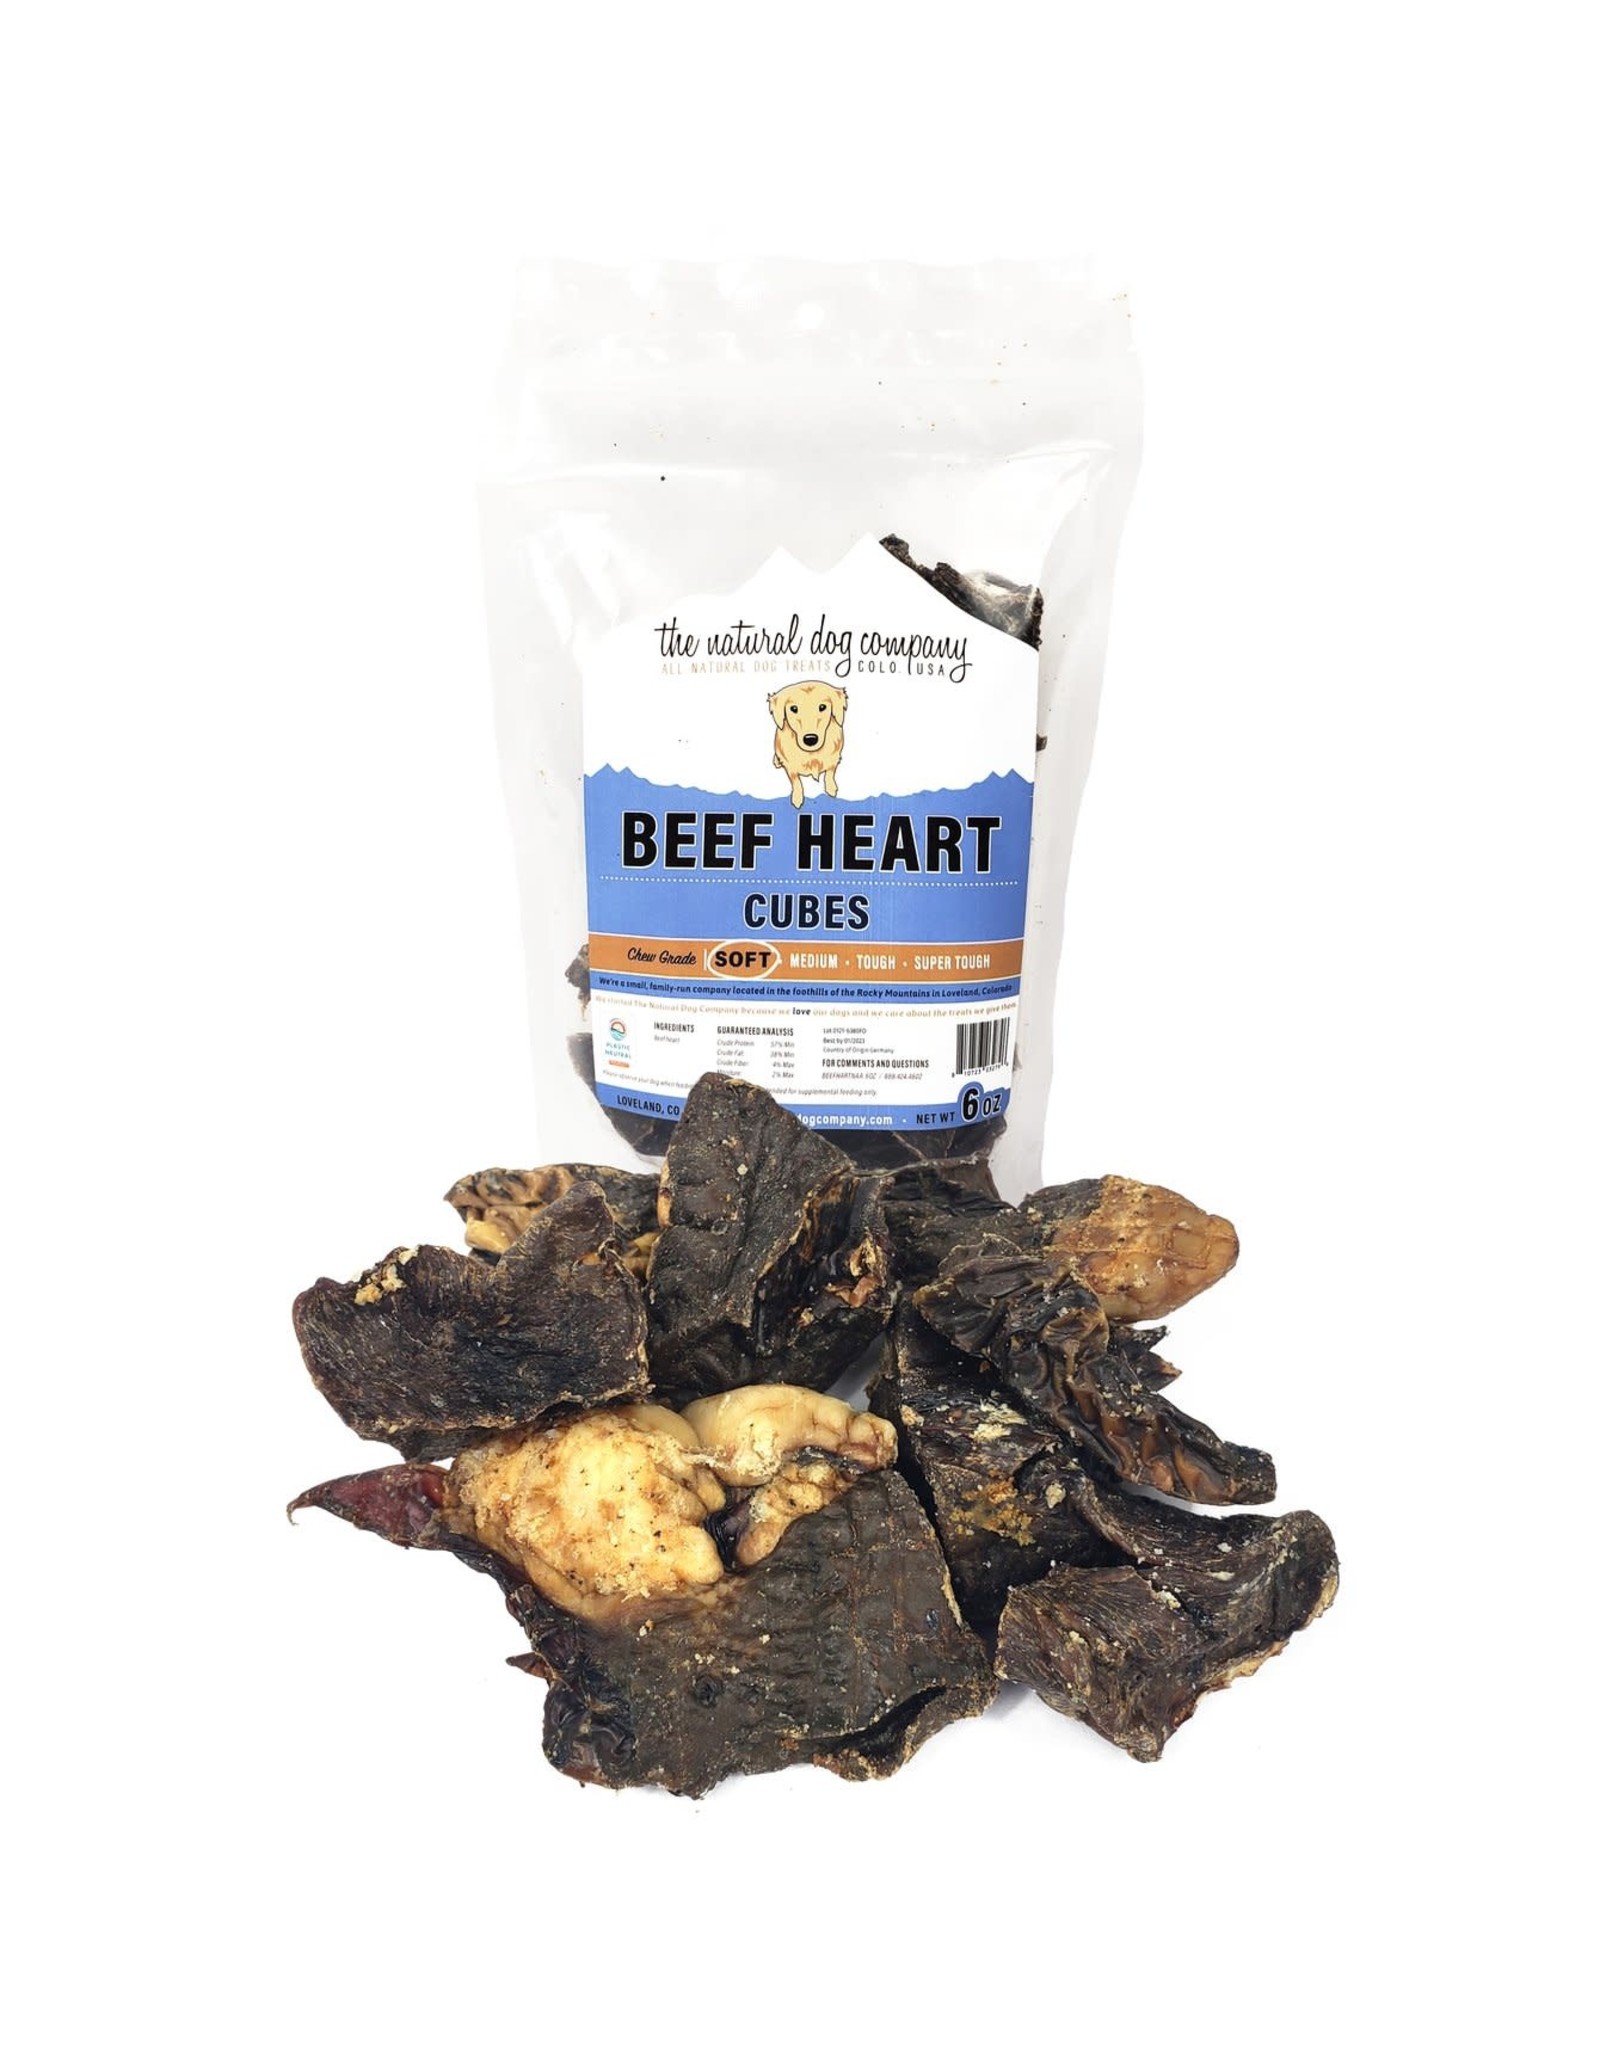 The Natural Dog Company Beef Heart Cubes - 6 oz